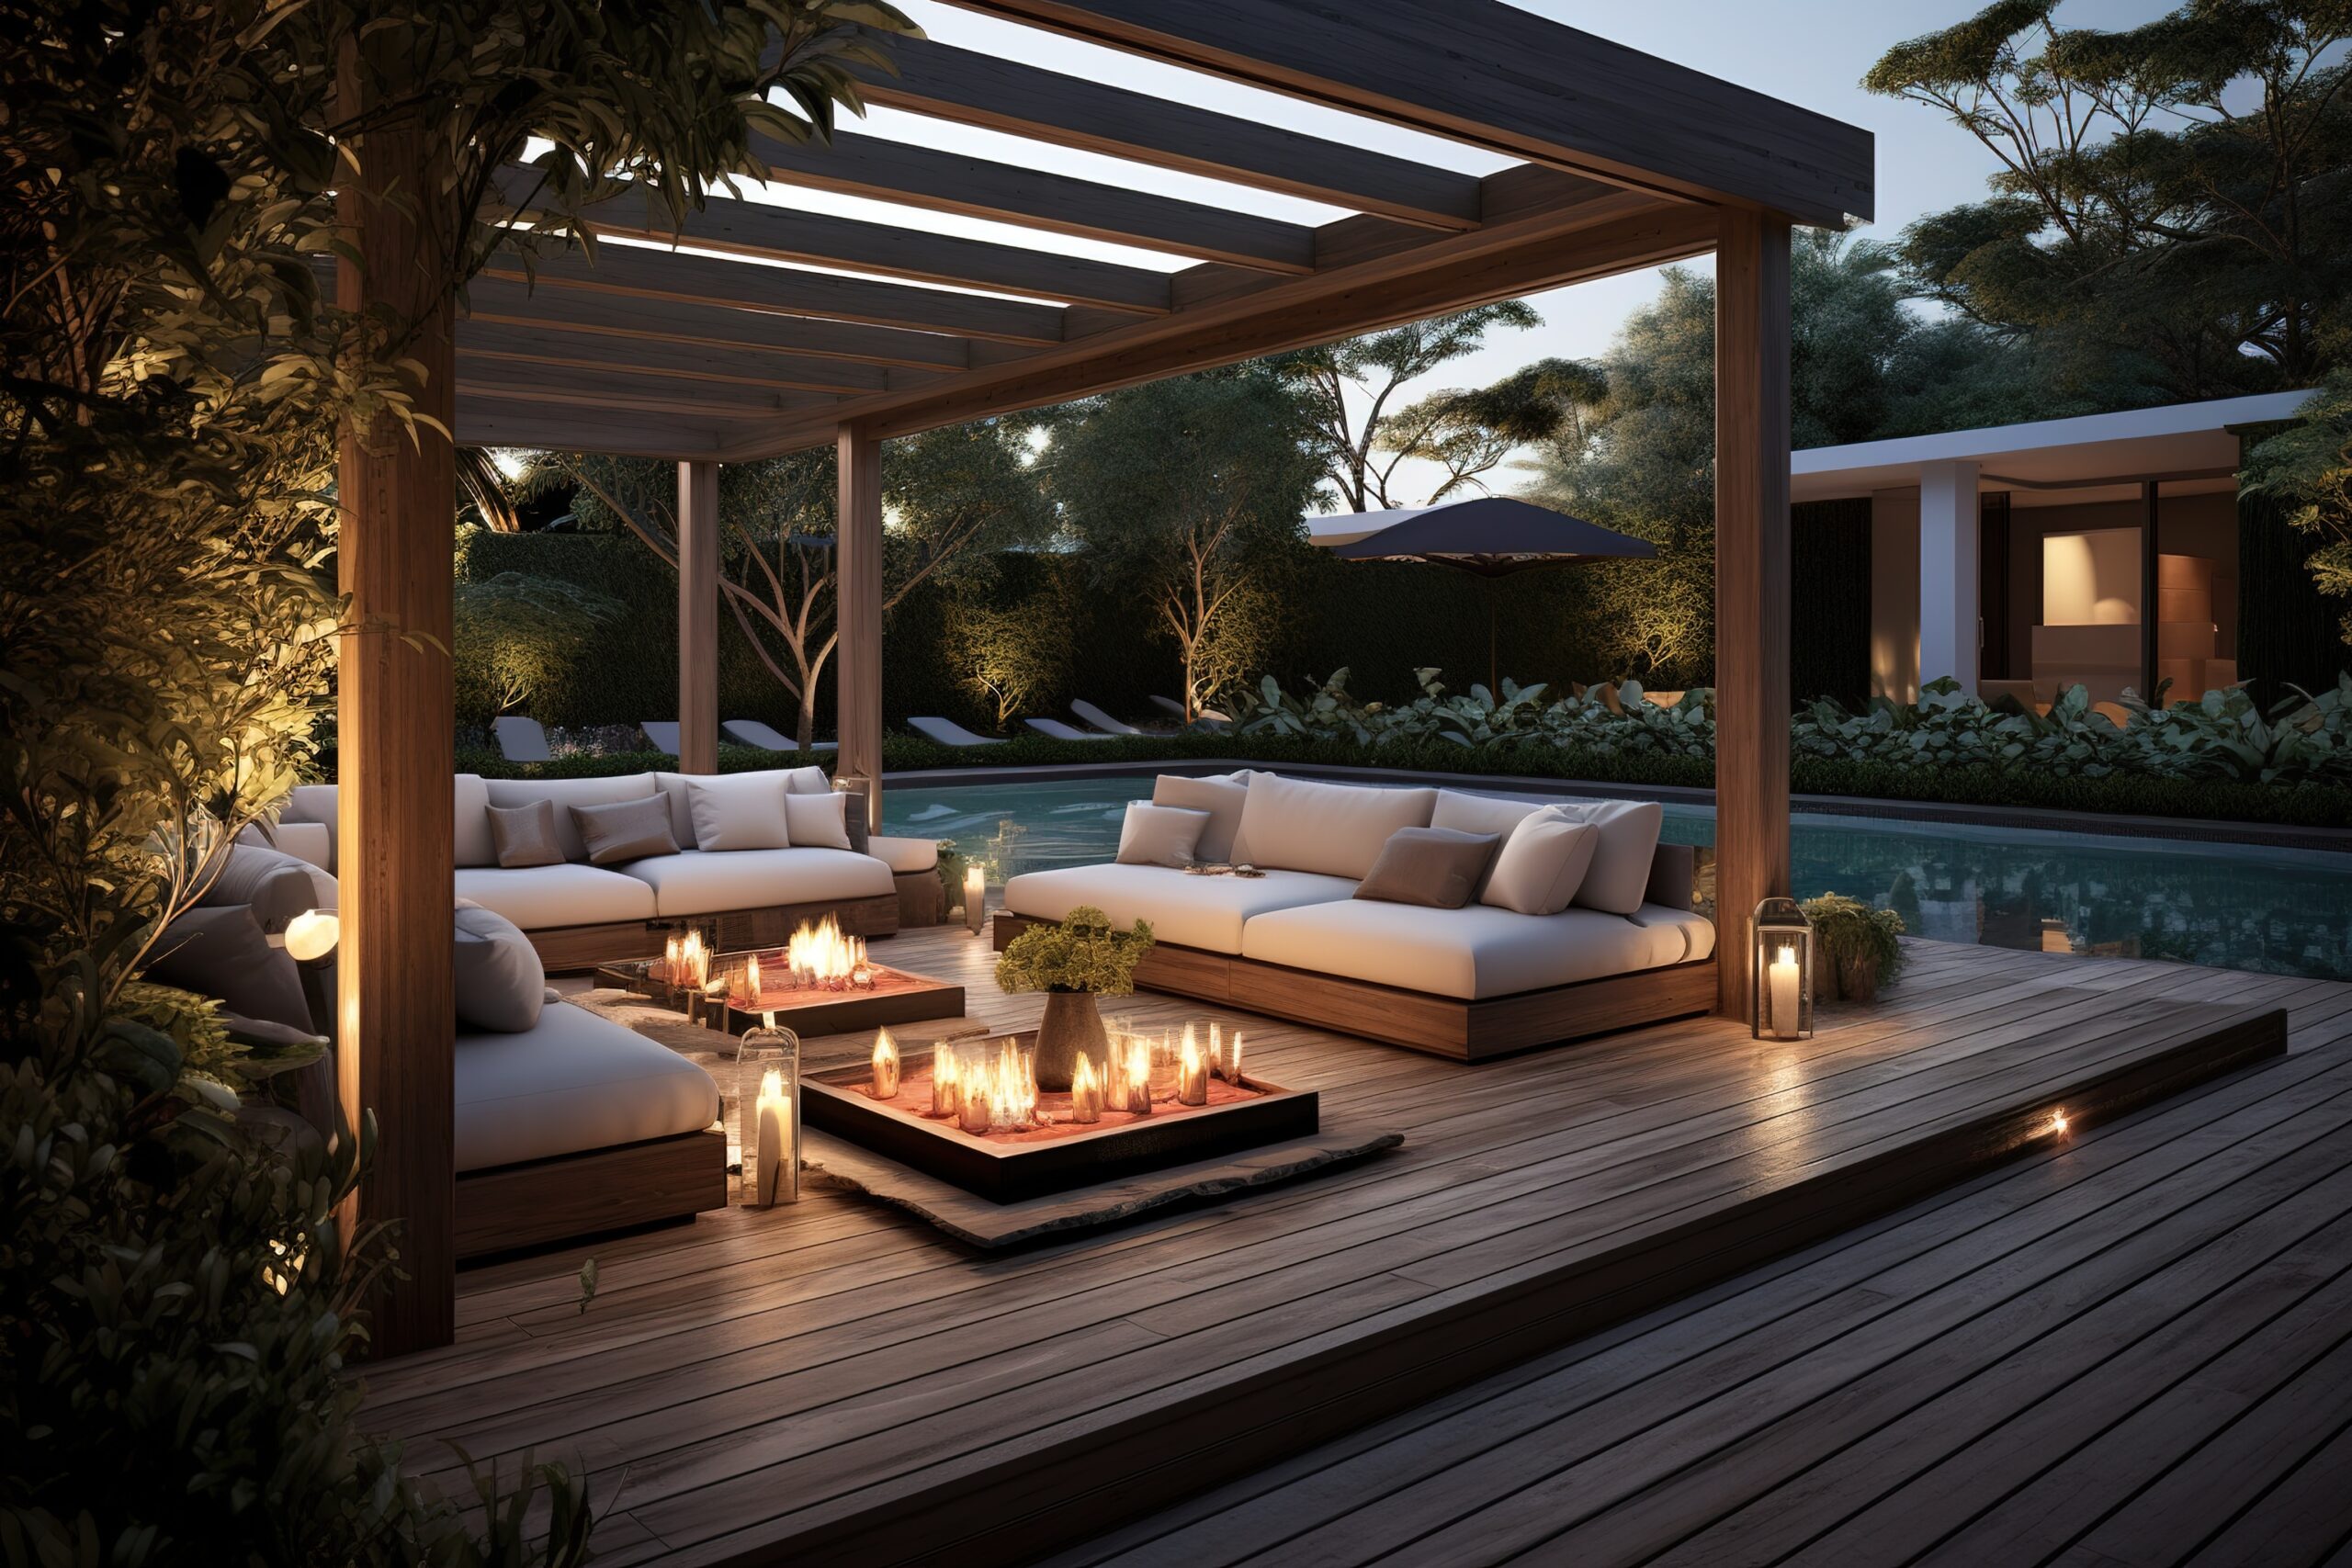 Outdoor living, Decking And Fireplaces.